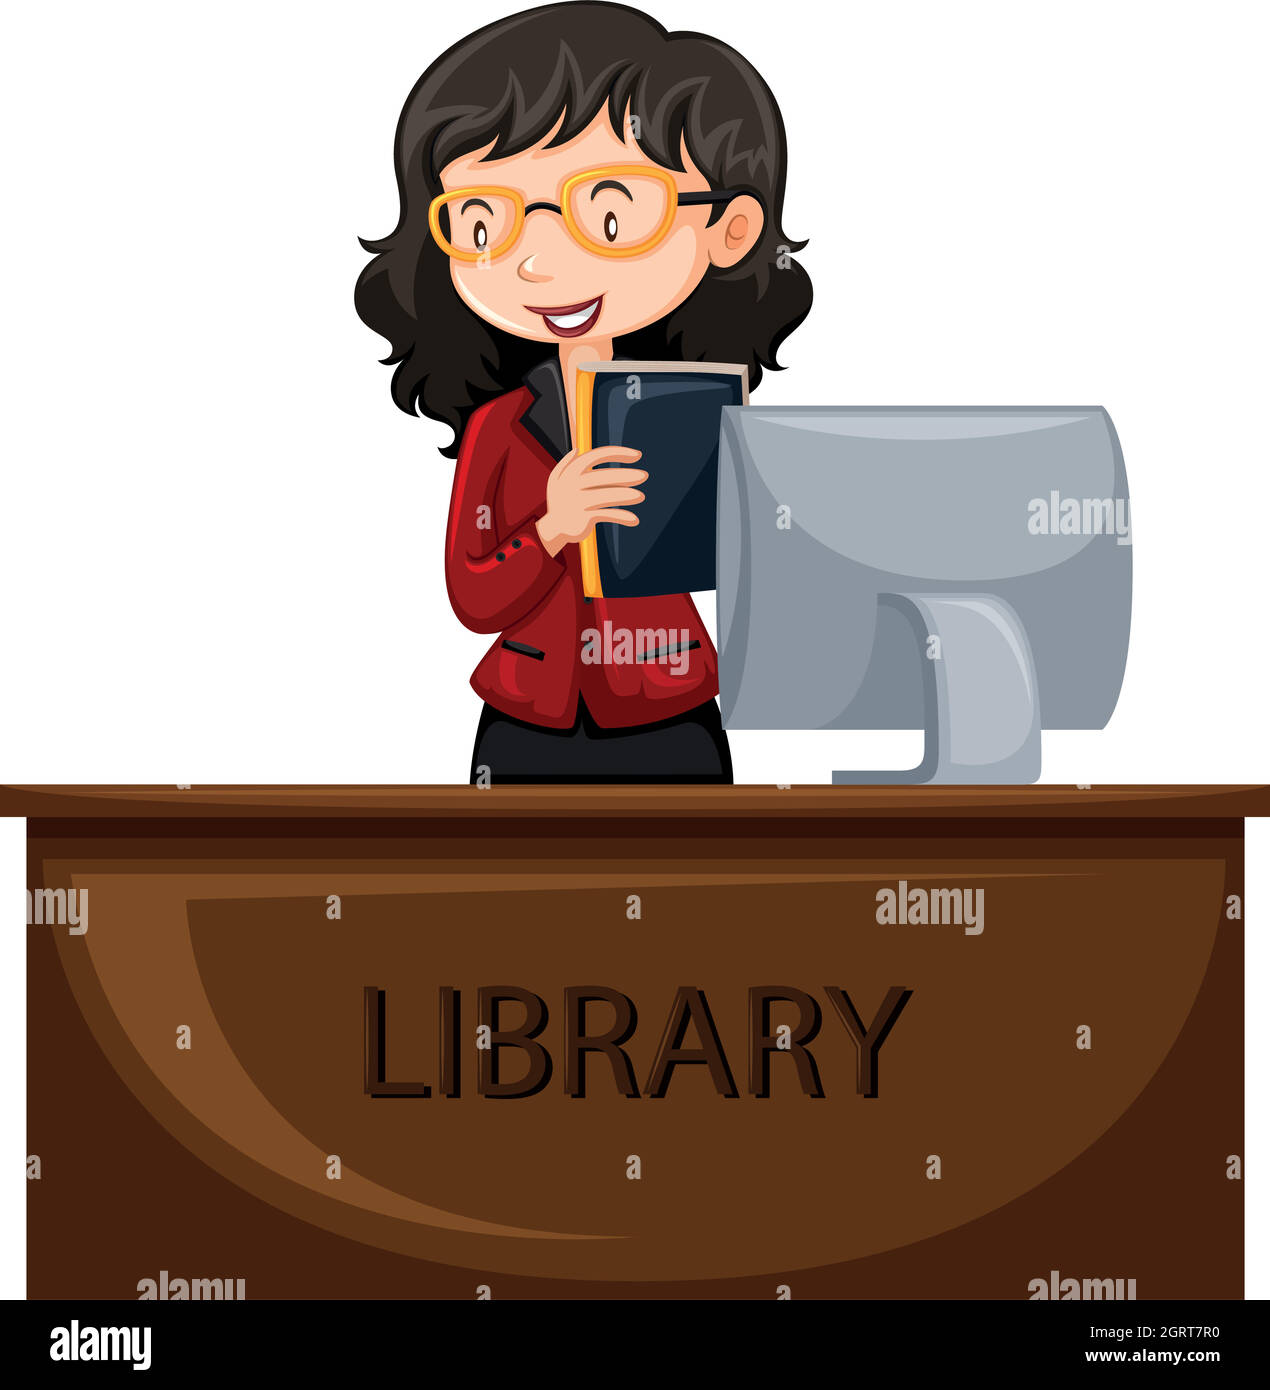 Library+computer+school+librarian Stock Vector Images - Alamy